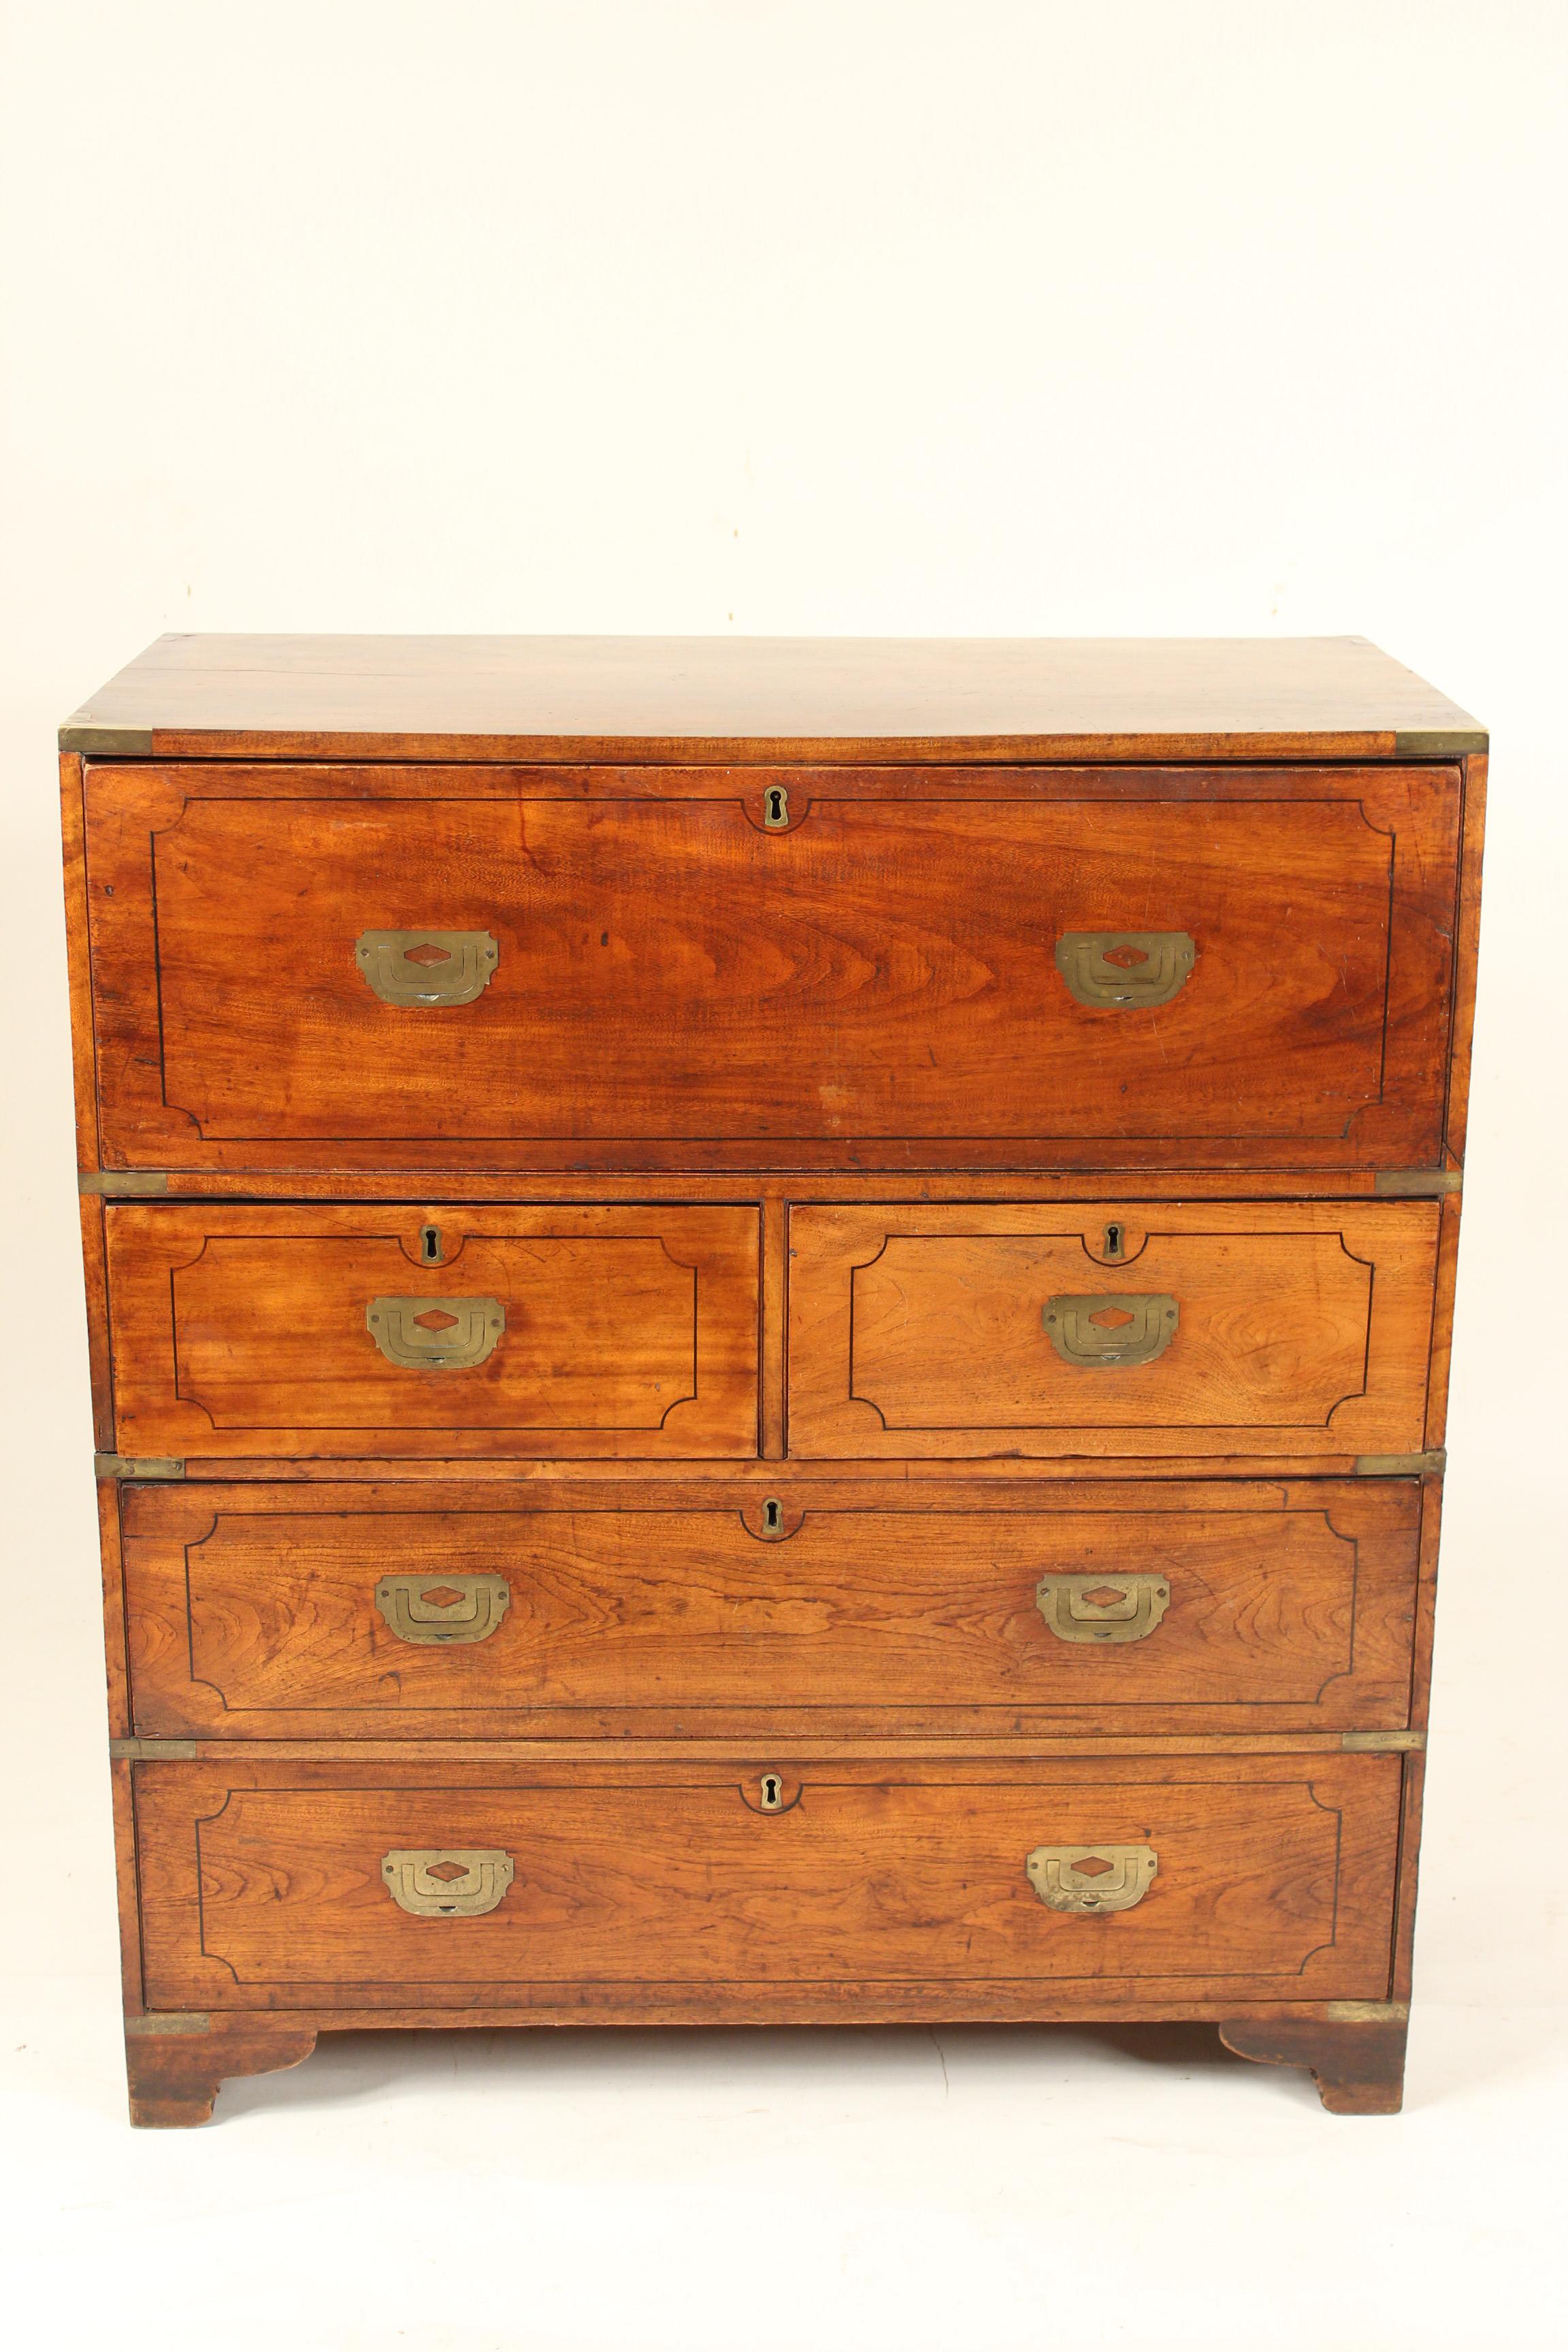 Camphor wood Campaign desk / chest with brass Campaign hardware, late 19th century. The top drawer folds down into a leather top writing surface. This desk / chest has excellent old color and original brass hardware. This is a two part chest. Most